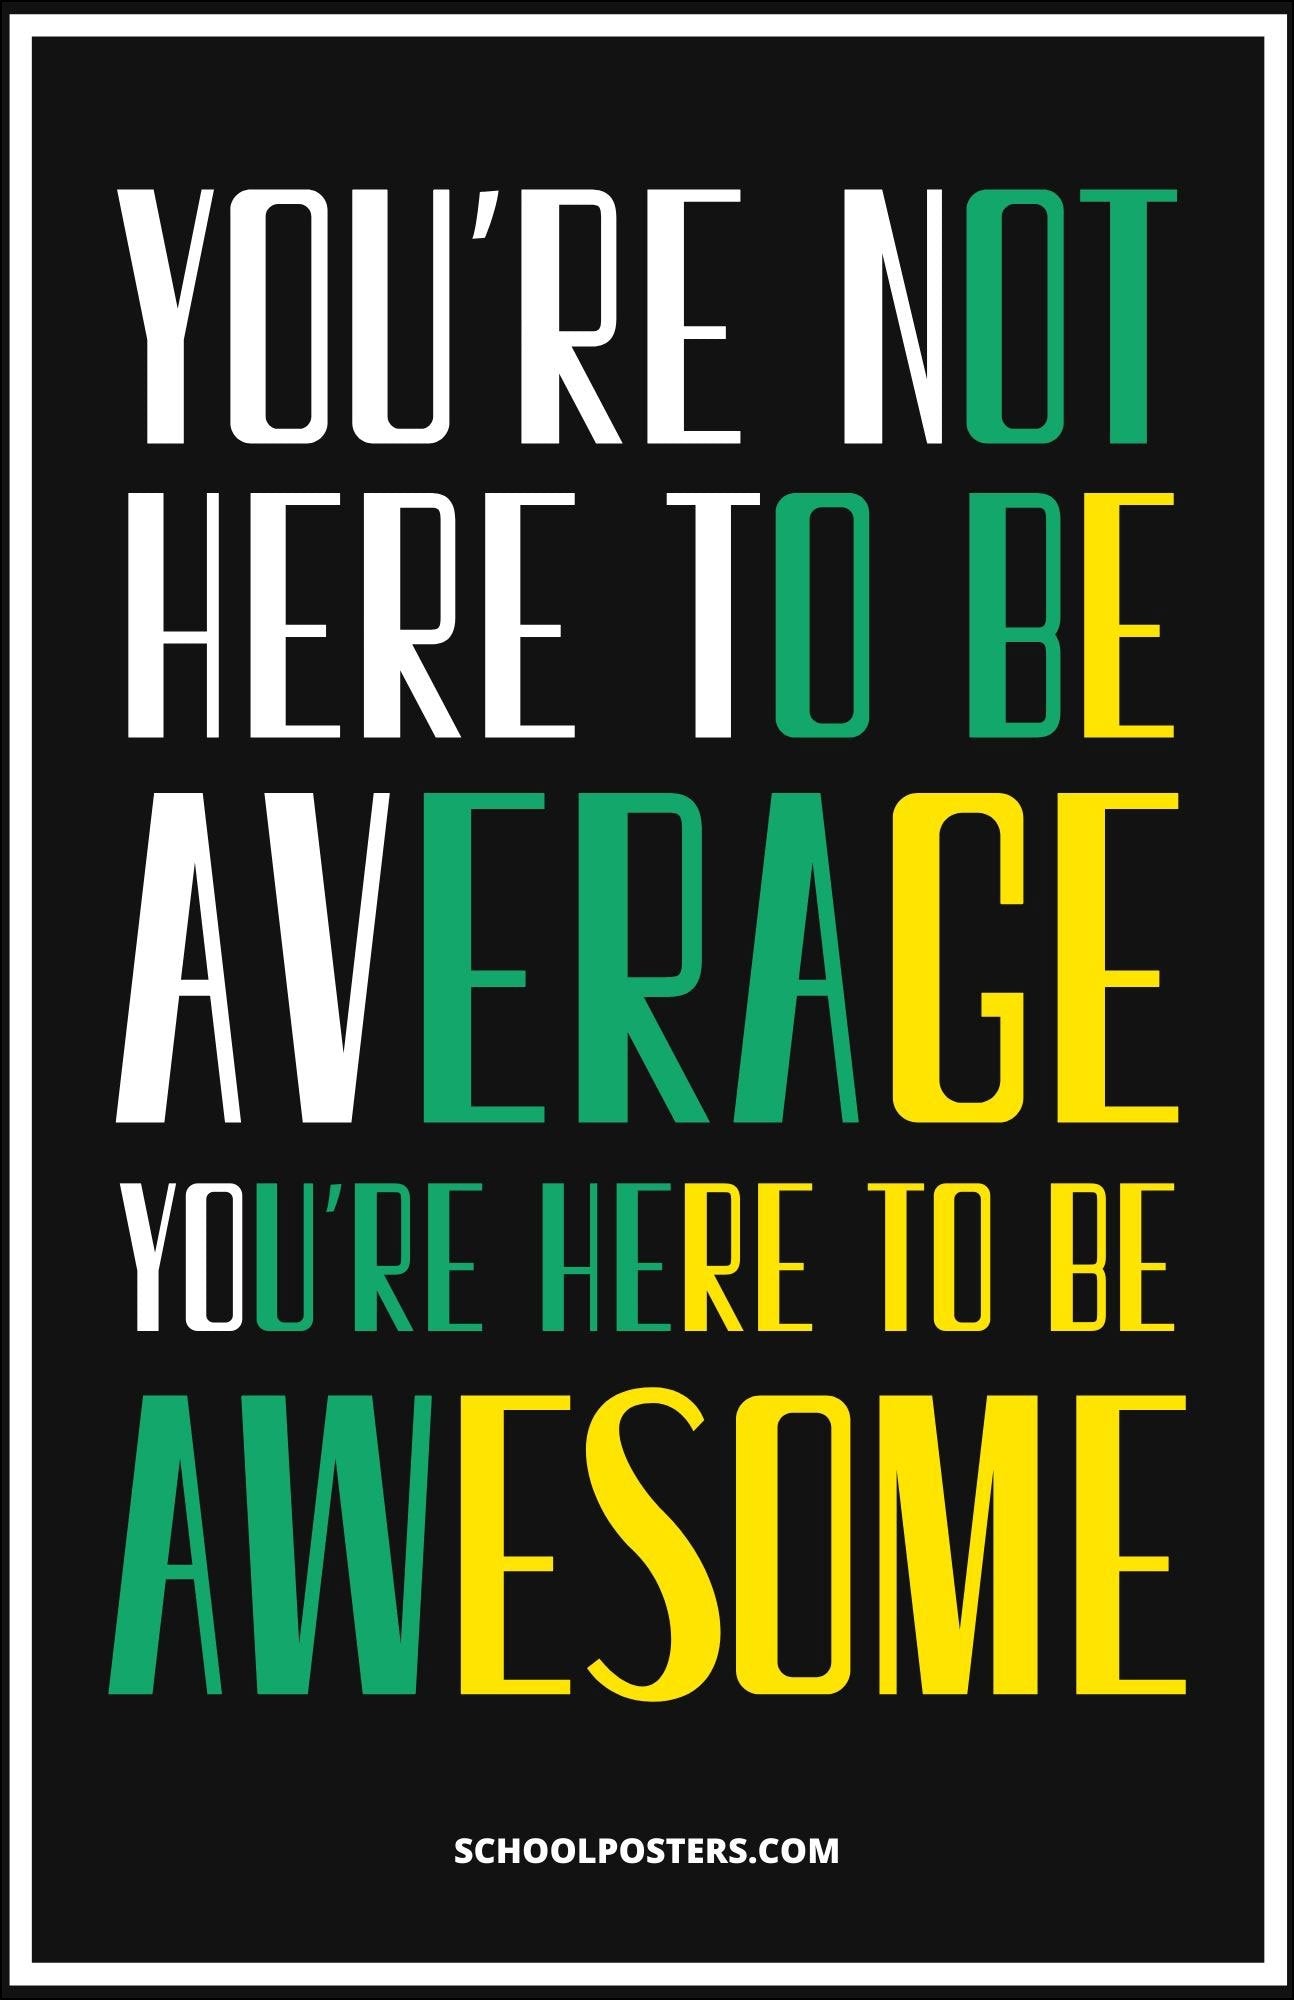 Be Awesome Poster